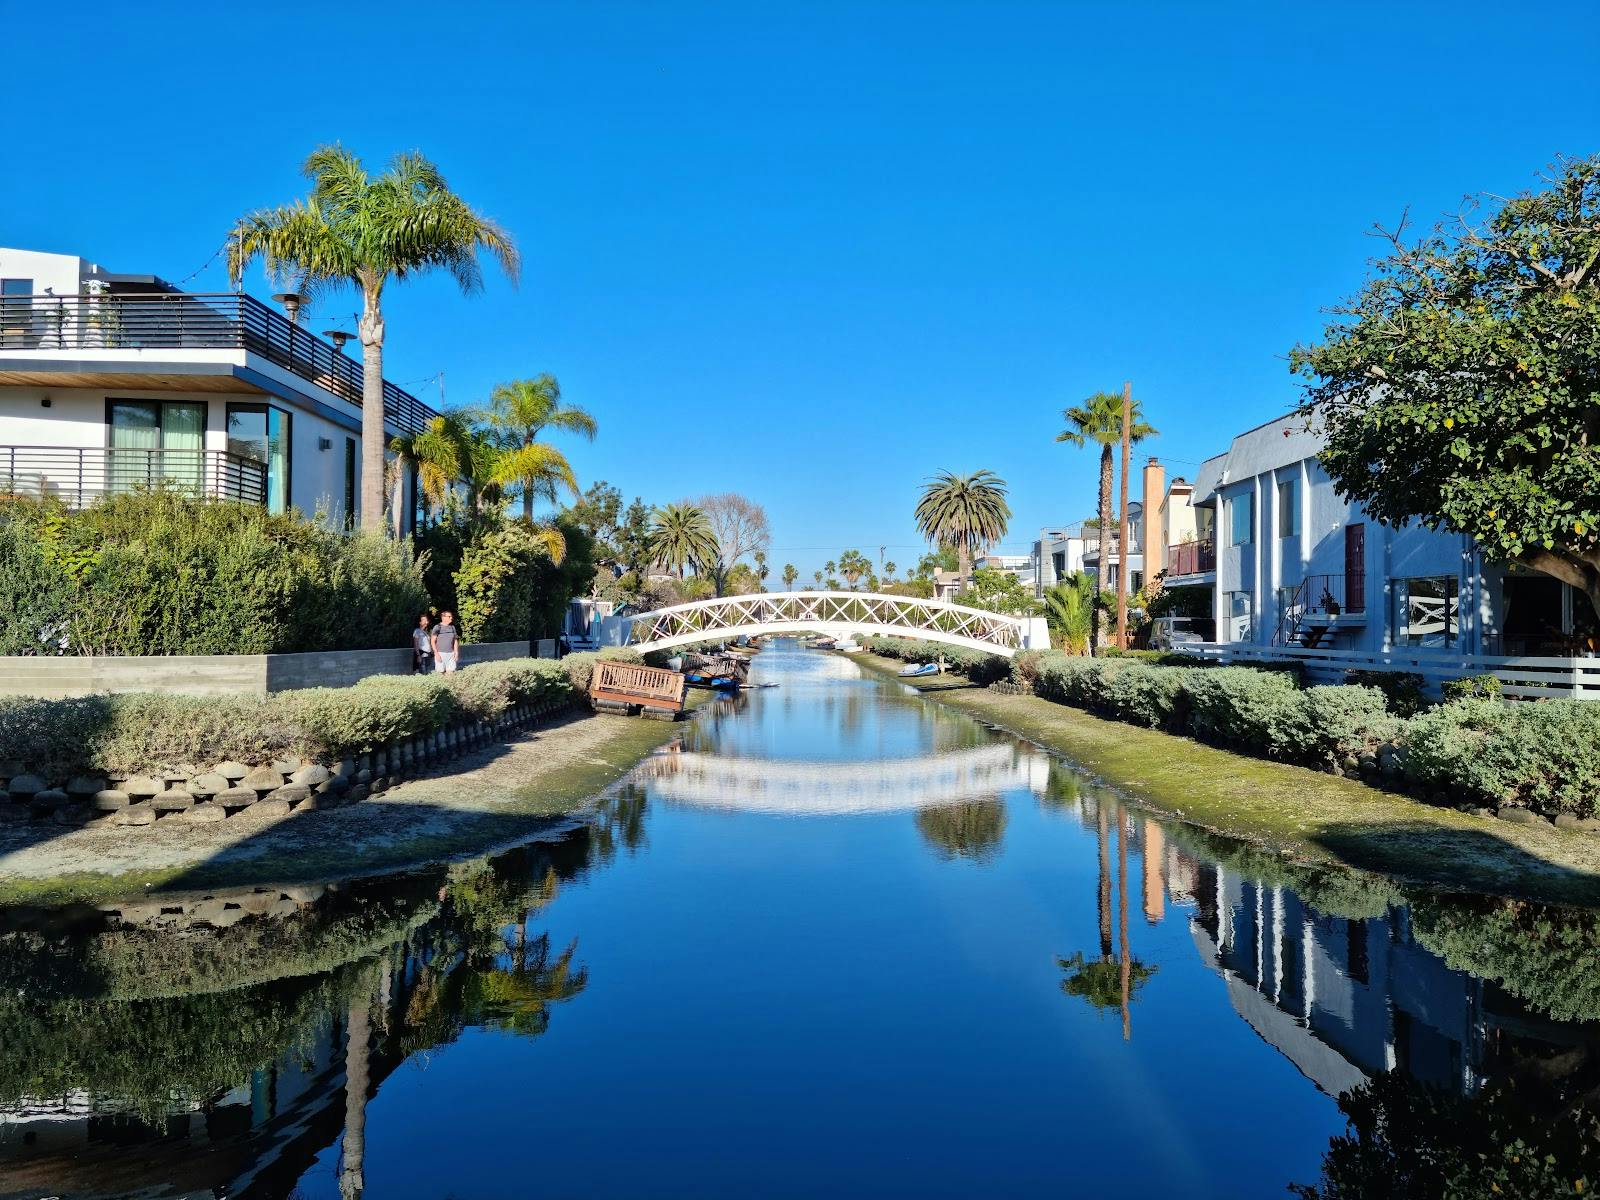 Image - Venice Canals